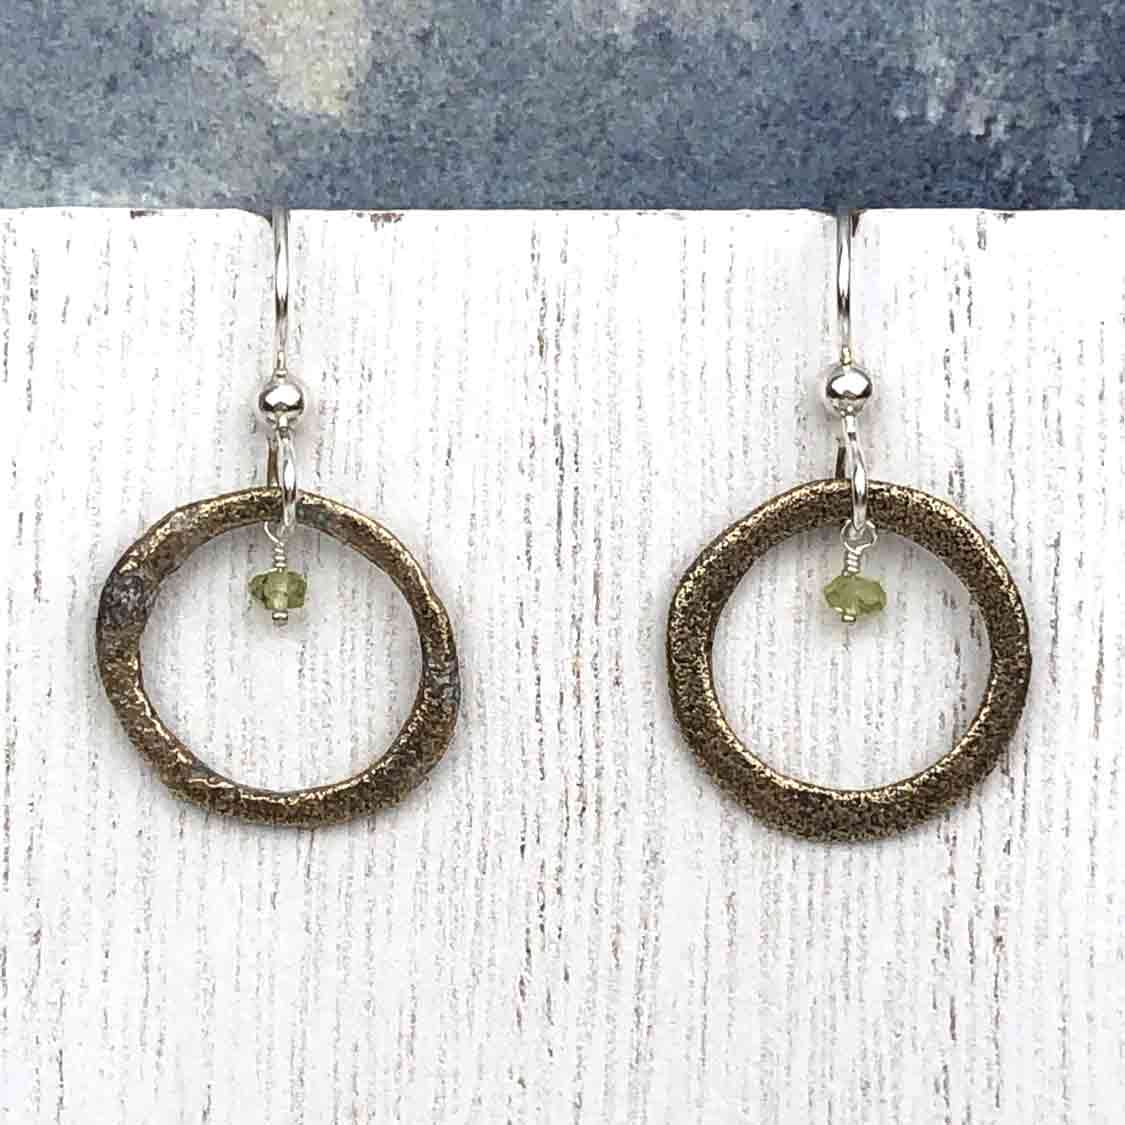 Gold to Red Bronze Celtic Ring Money Earrings with Genuine Peridot